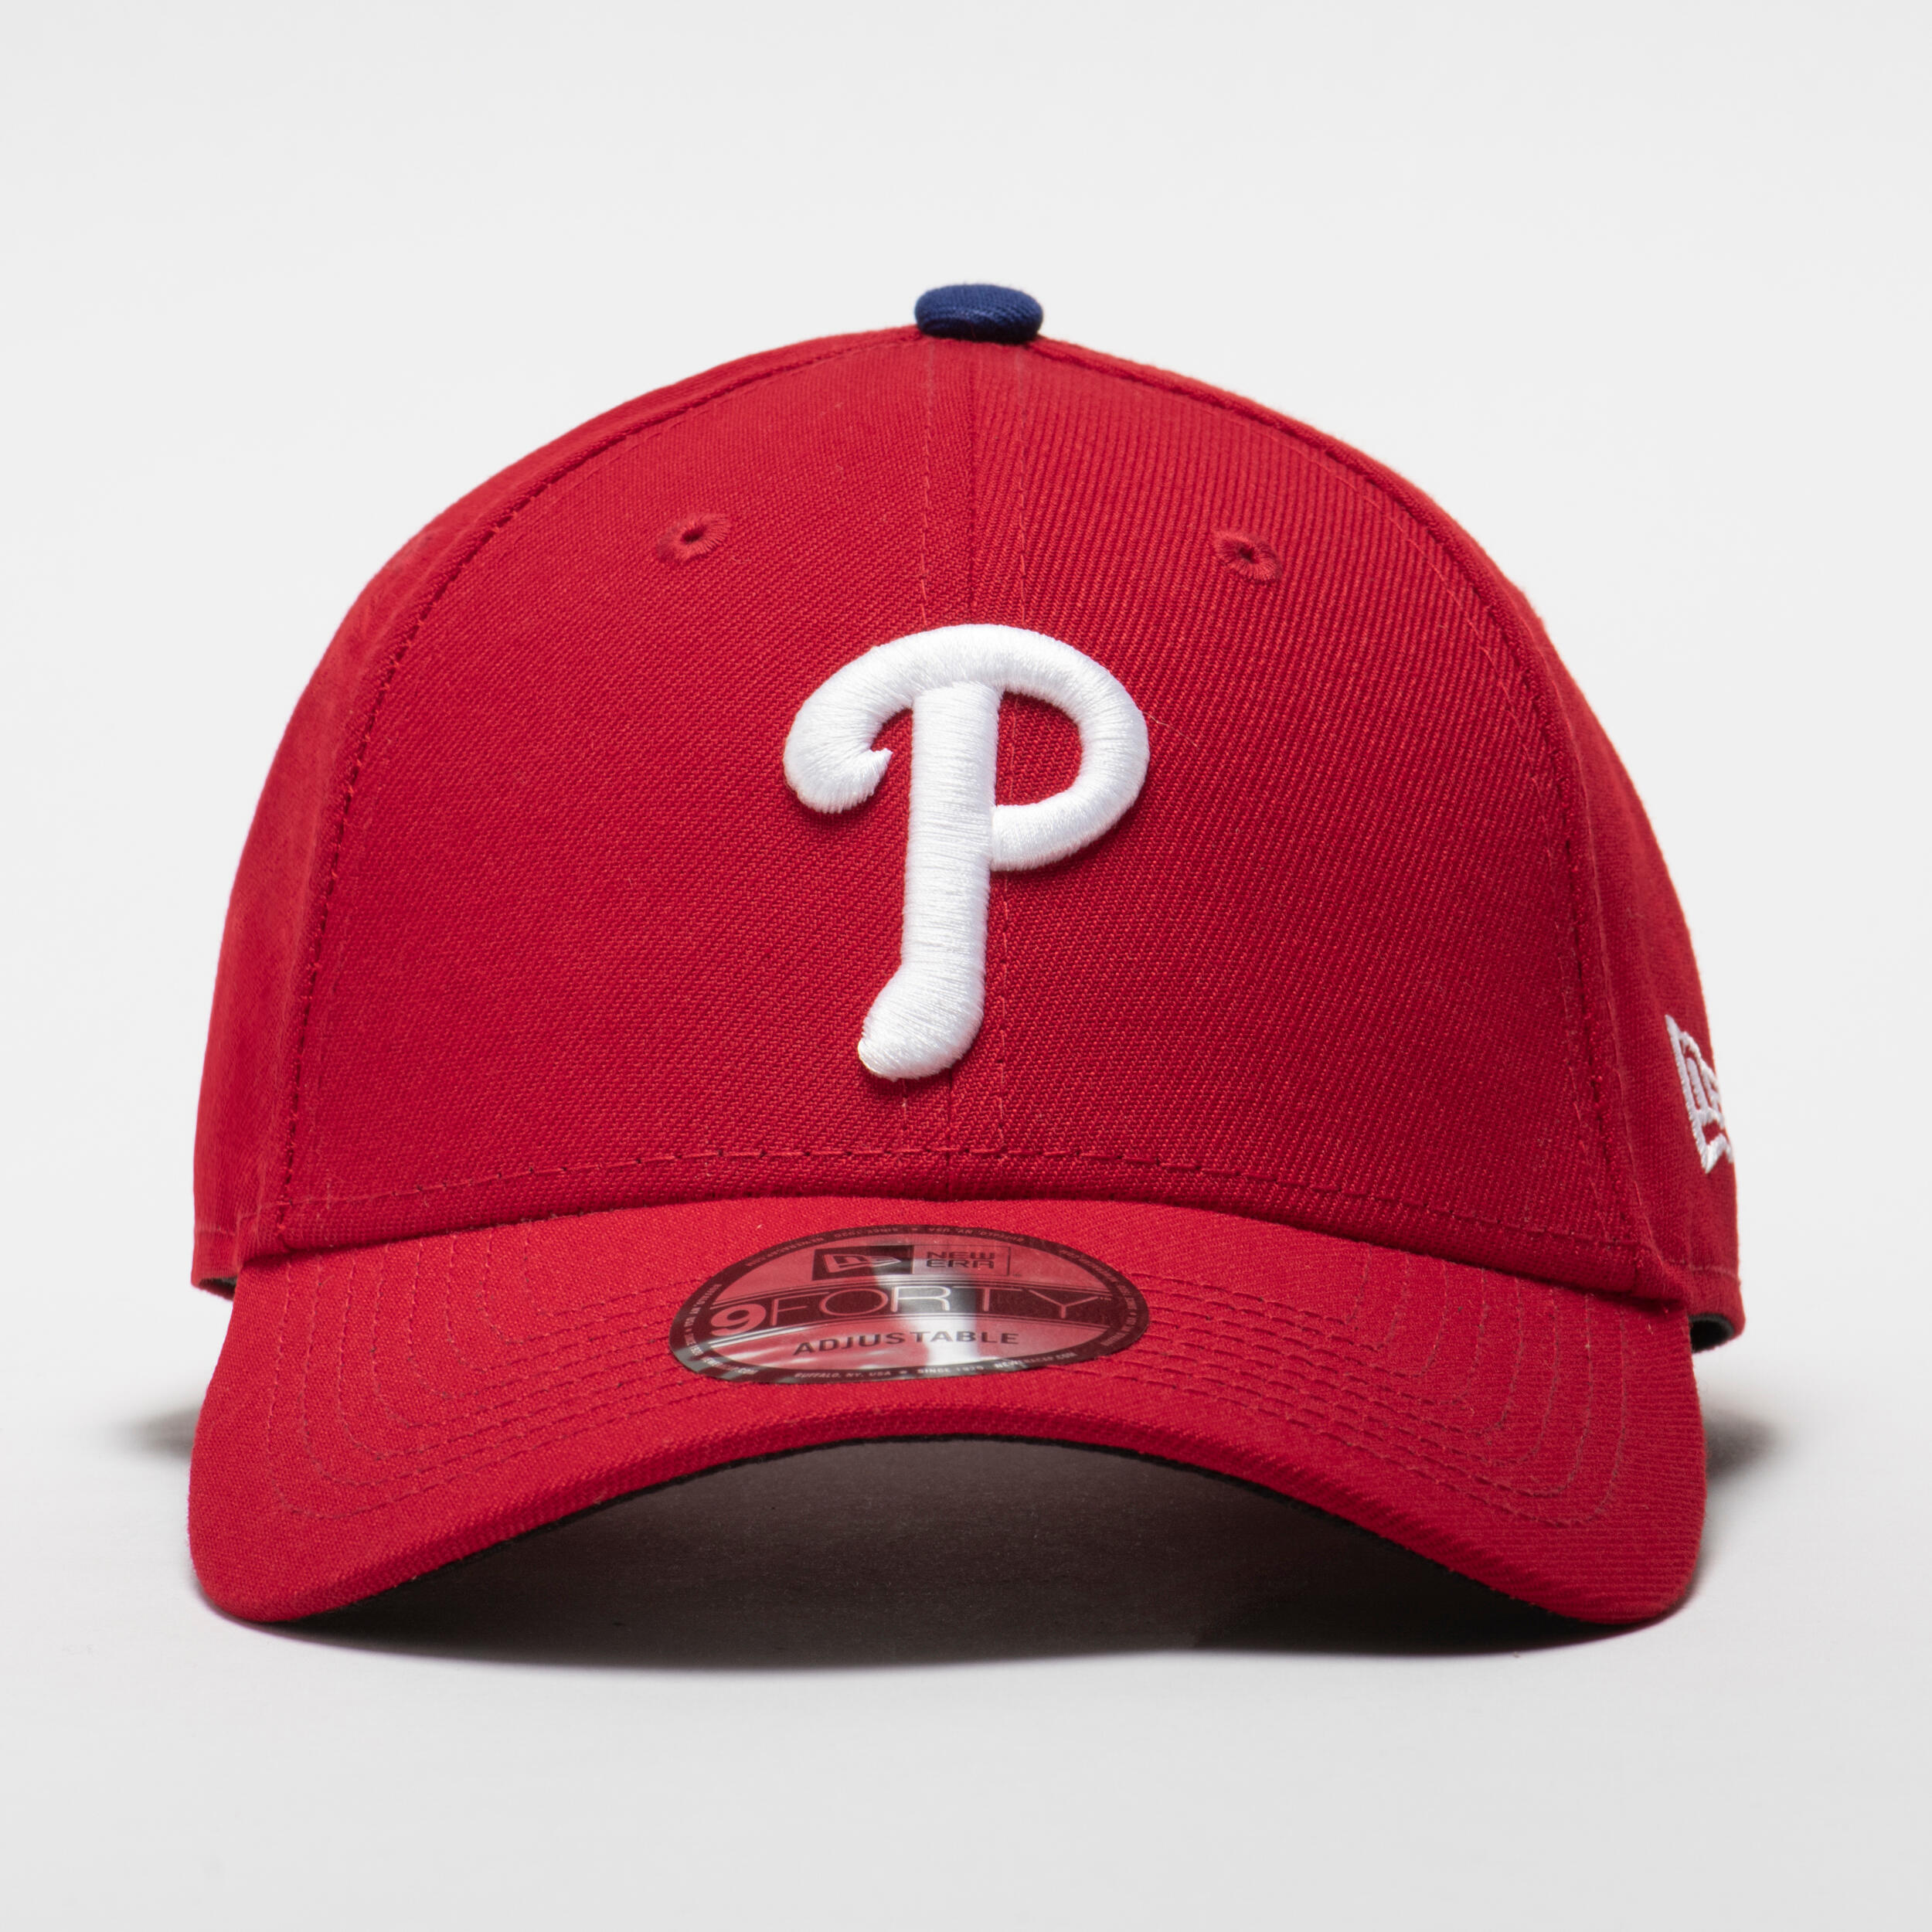 New Era Philadelphia Phillies MLB Authentic Collection Game Fitted Cap   The Shoe Company